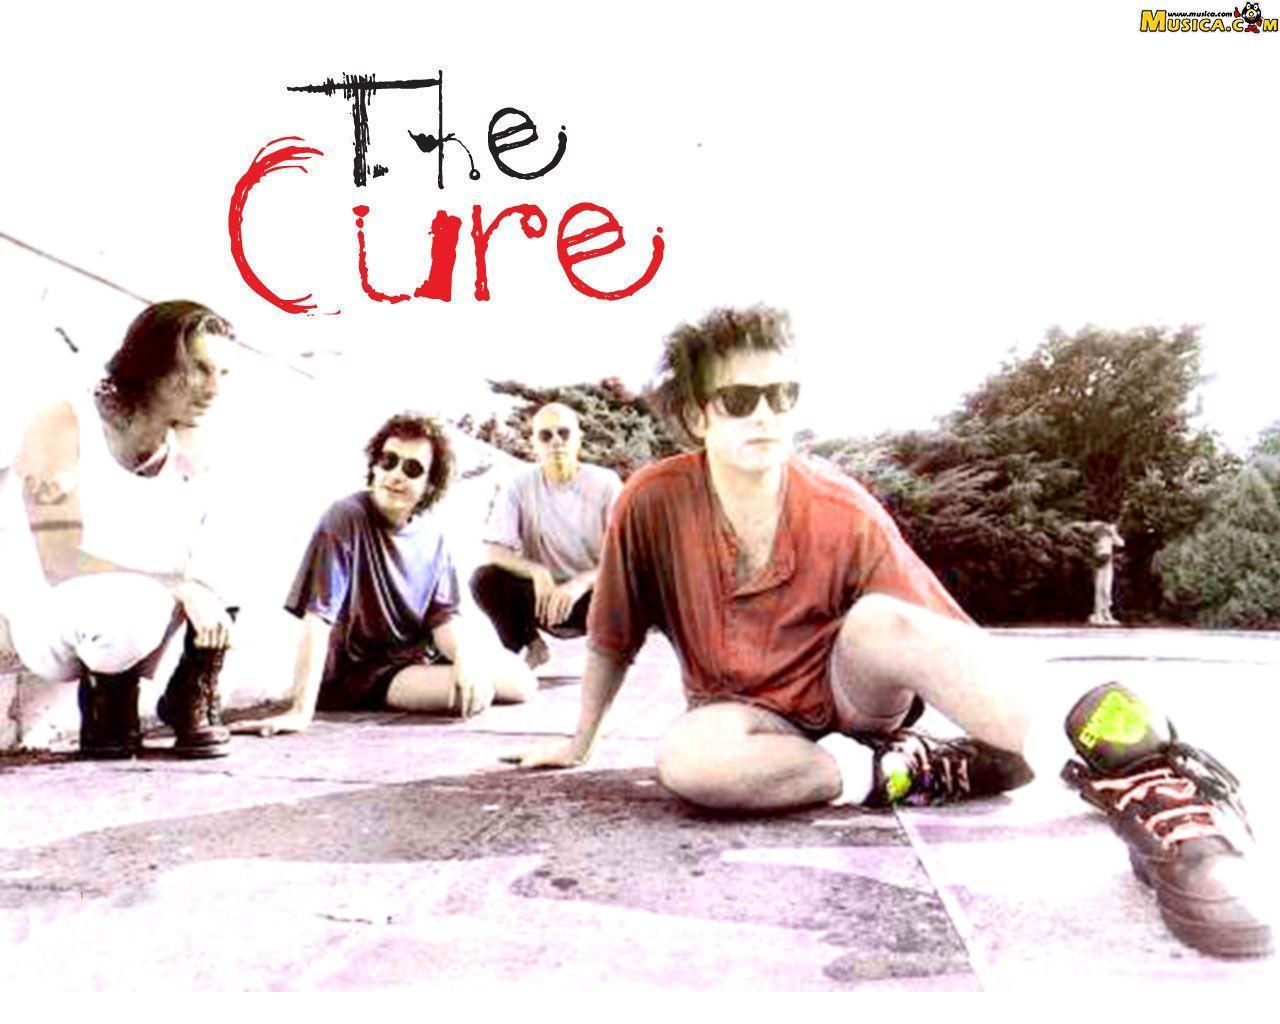 The Cure Wallpaper, Mobile Compatible The Cure Wallpaper